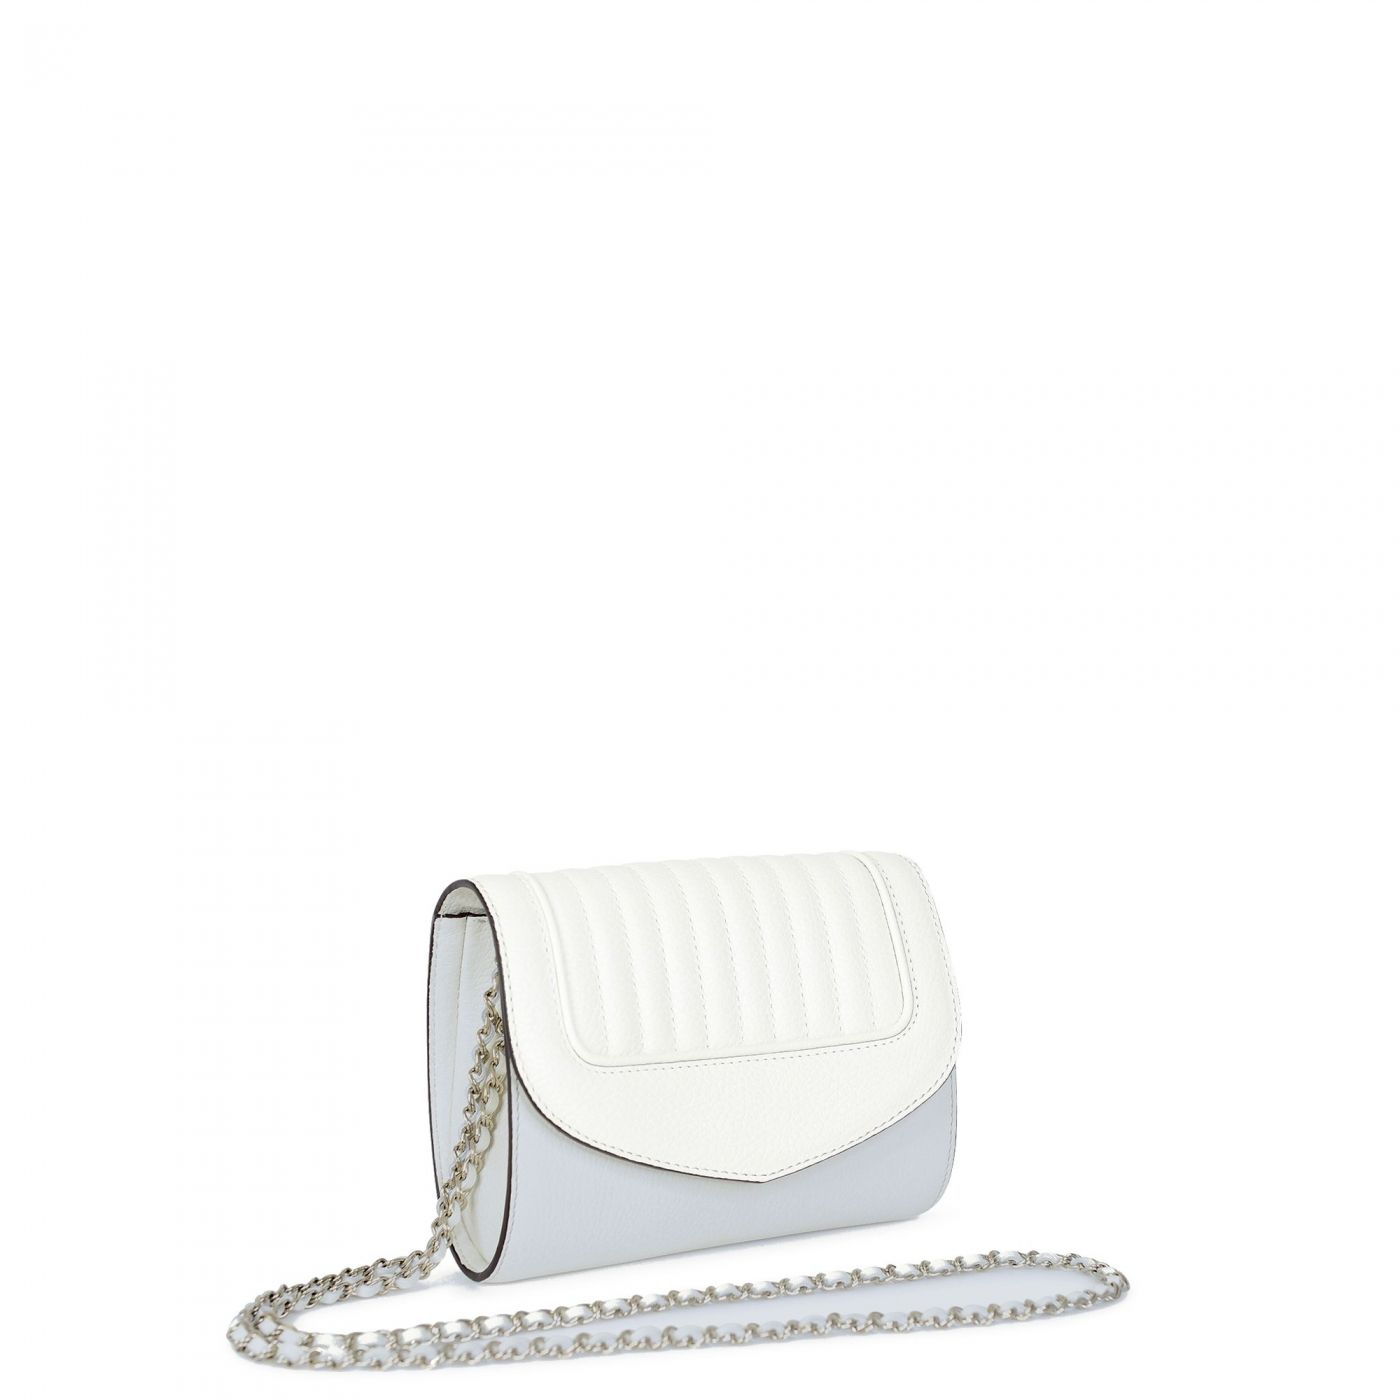 Crossbody Bag in White Leather Jeanne PM Delage